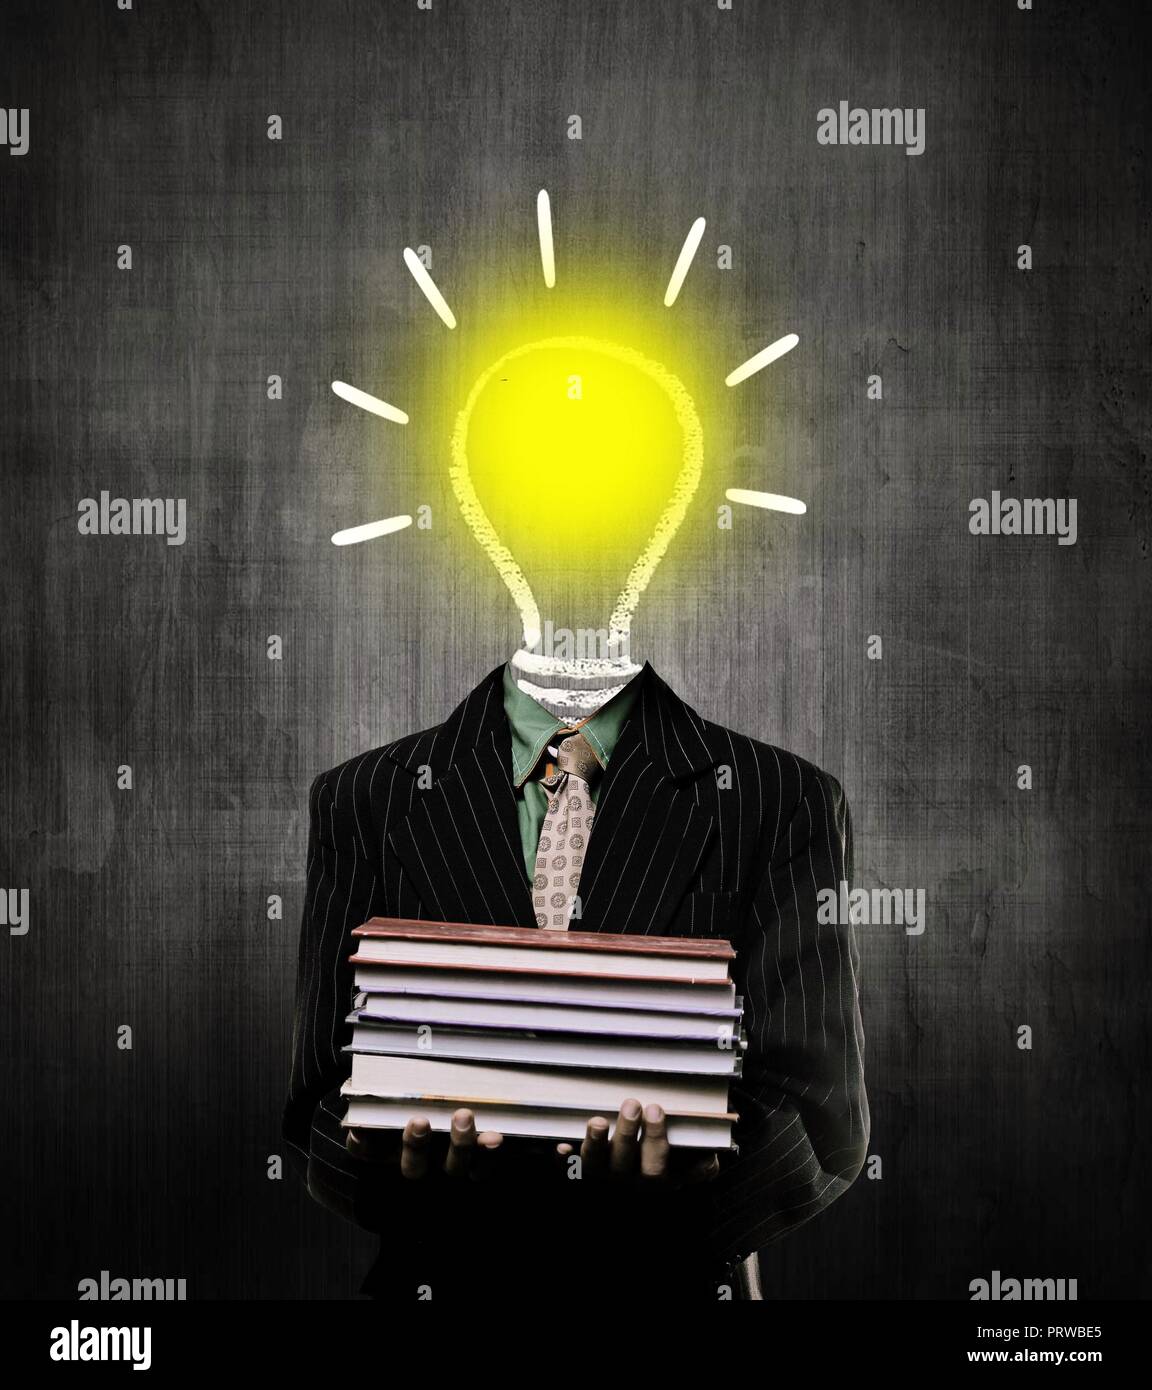 Ideas Bulb Igniting And Holding Books And Wearing Suit,  While Standing Before A Chalkboard, Stock Photo